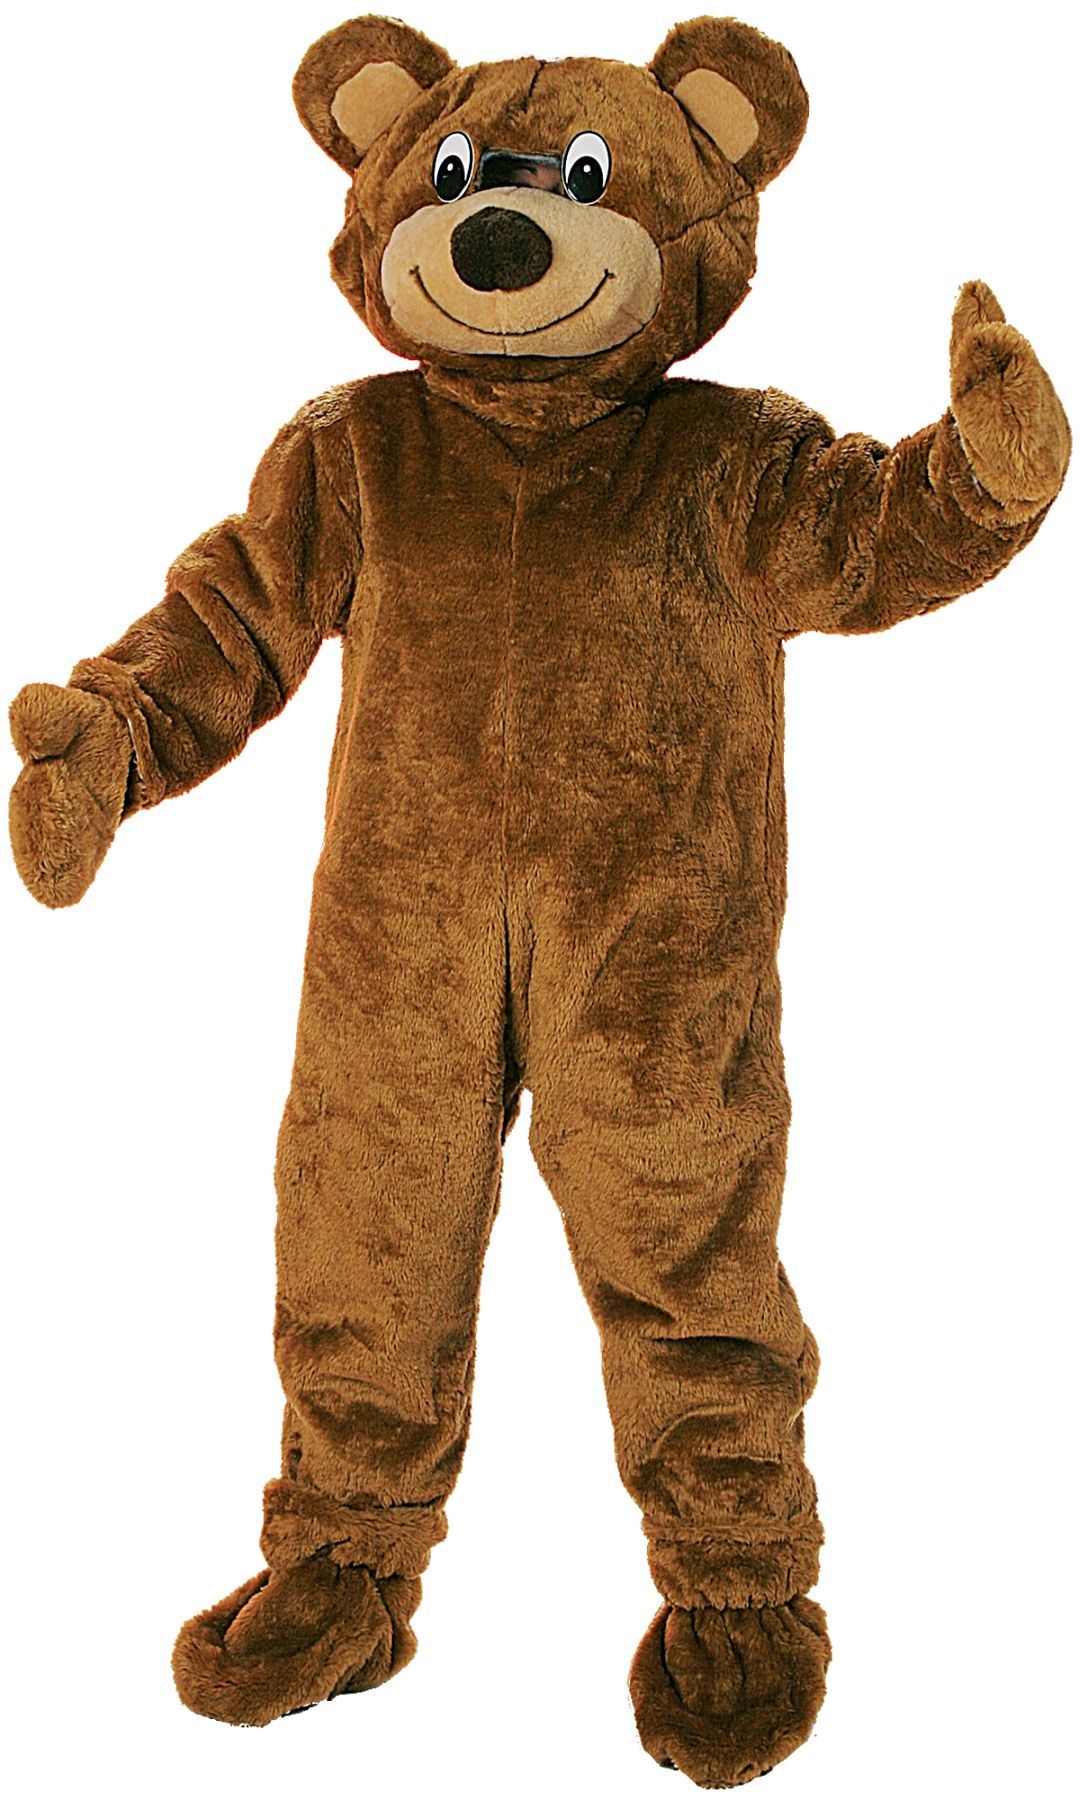 Big bear overall with head